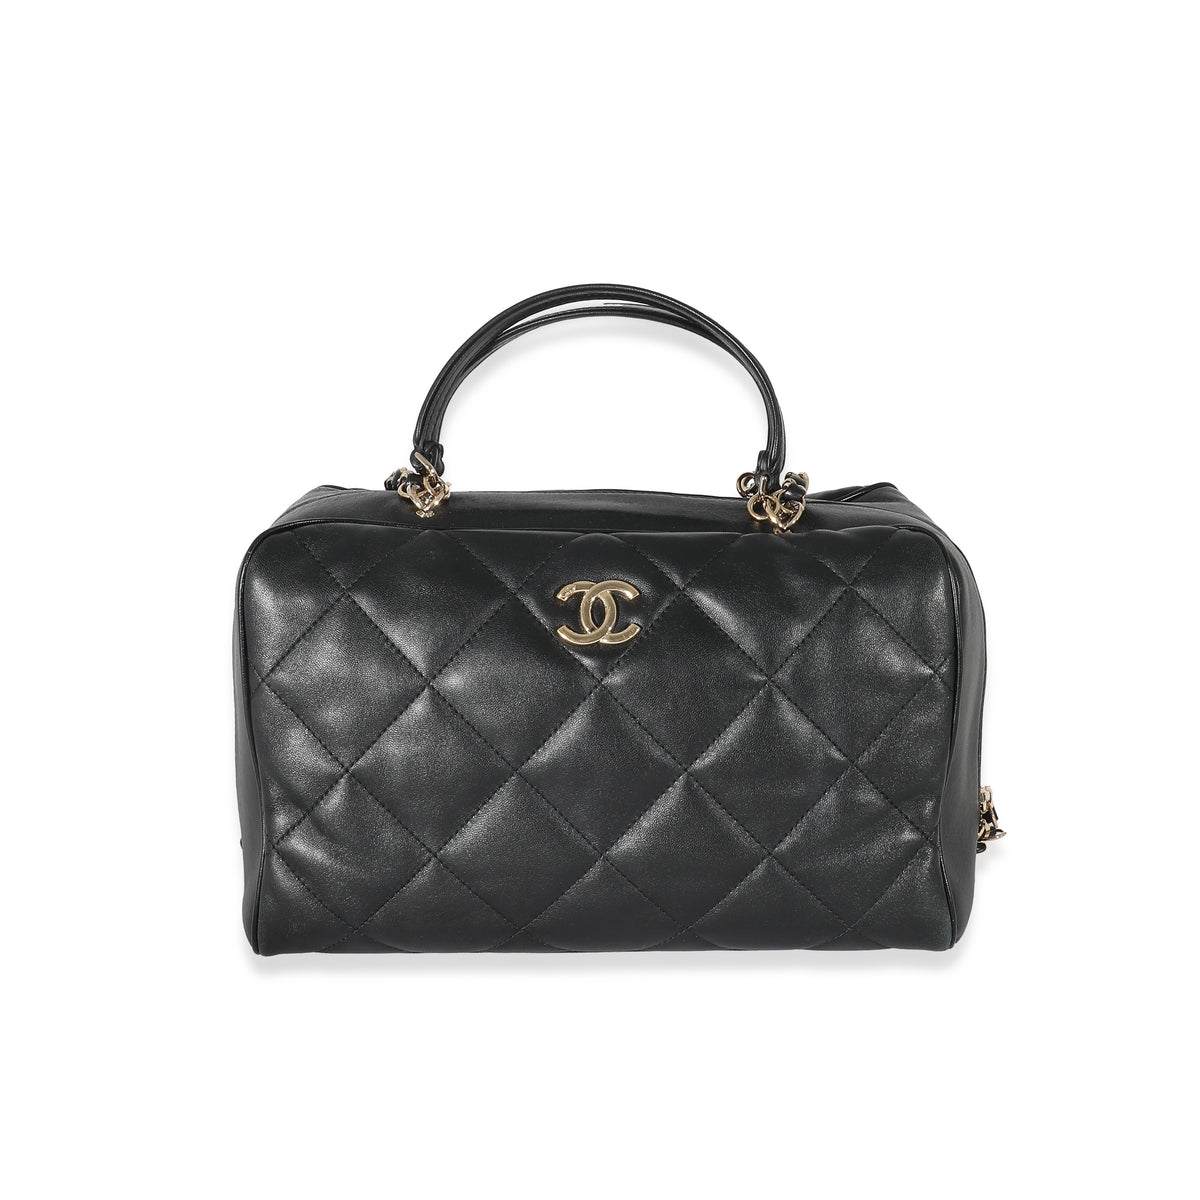 Chanel Black Quilted Lambskin CC Chain Zip Bowling Bag, myGemma